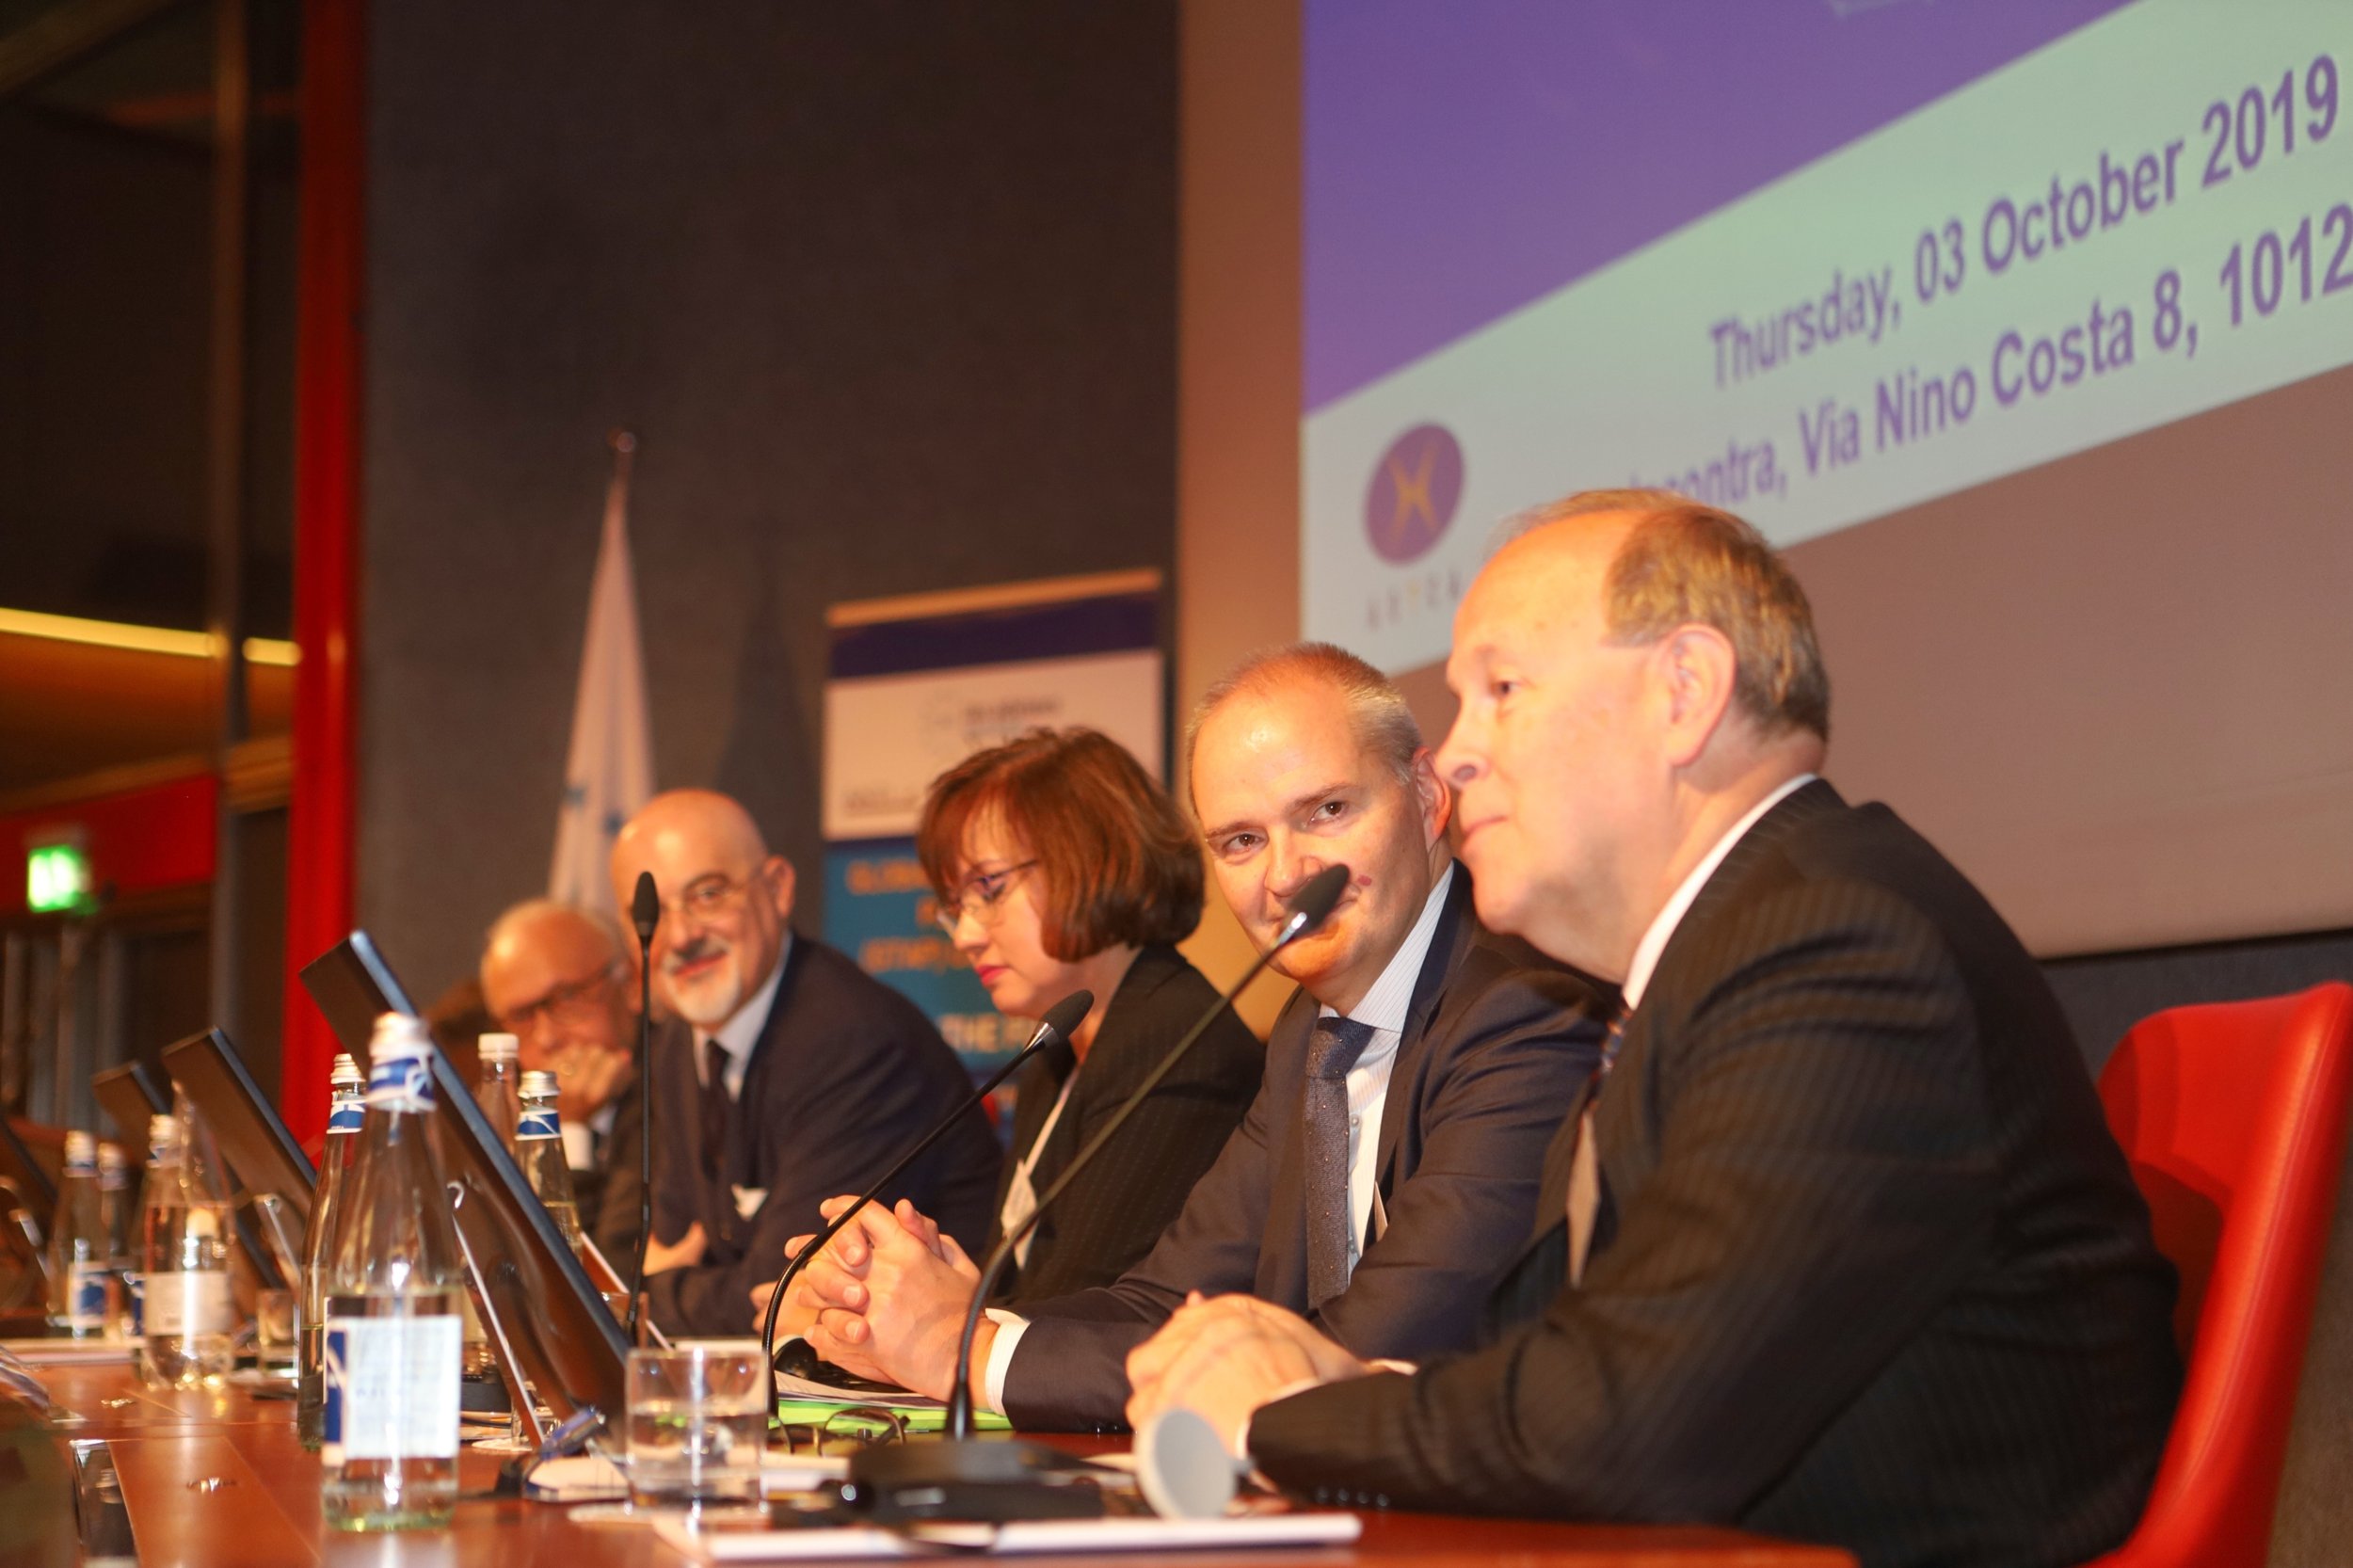 gtap-conference-on-03-october-2019-in-torino_48903193378_o.jpg